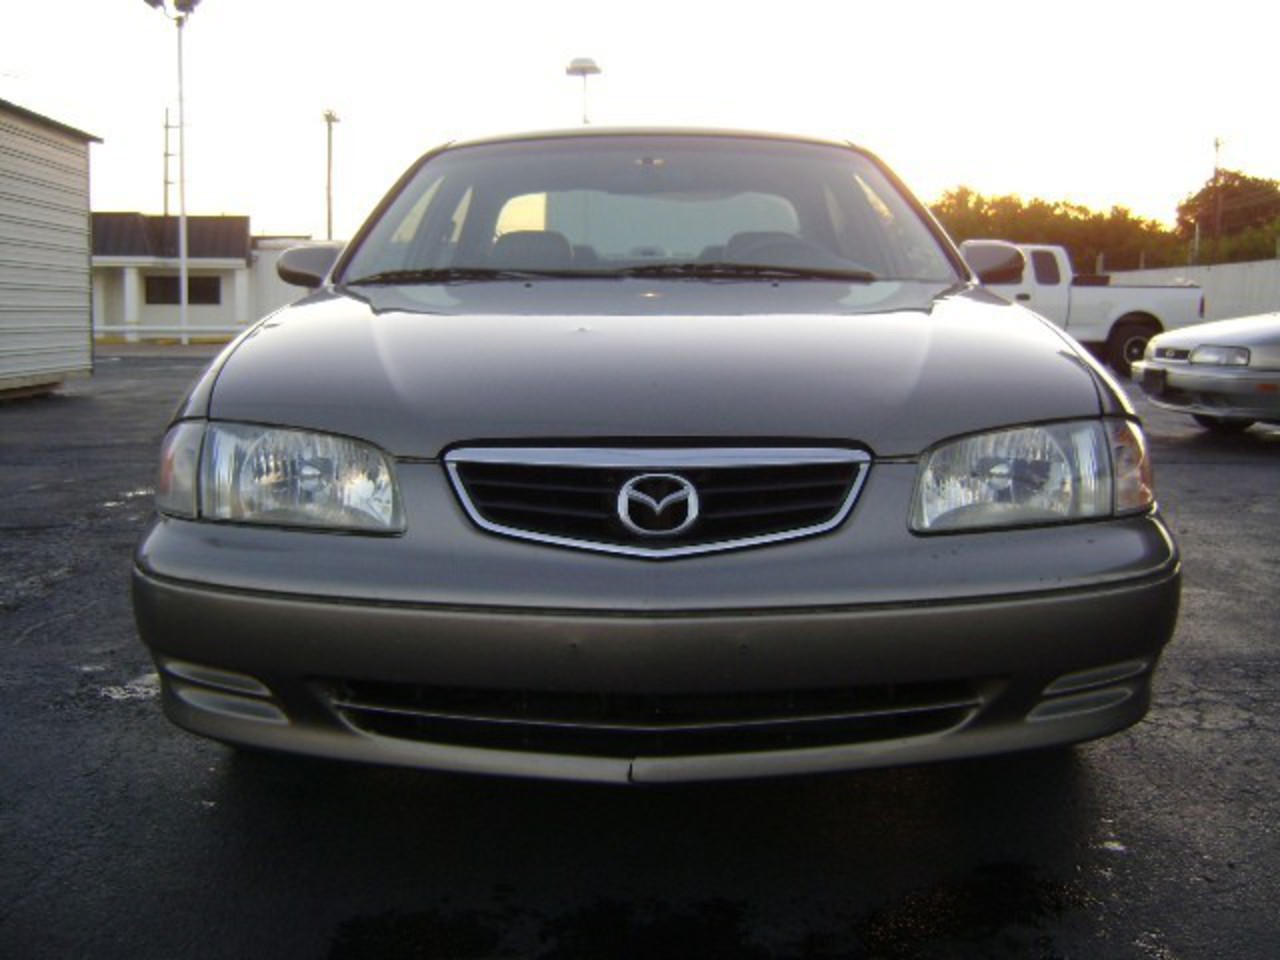 Mazda 626 20 V6 Limited - huge collection of cars, auto news and reviews,